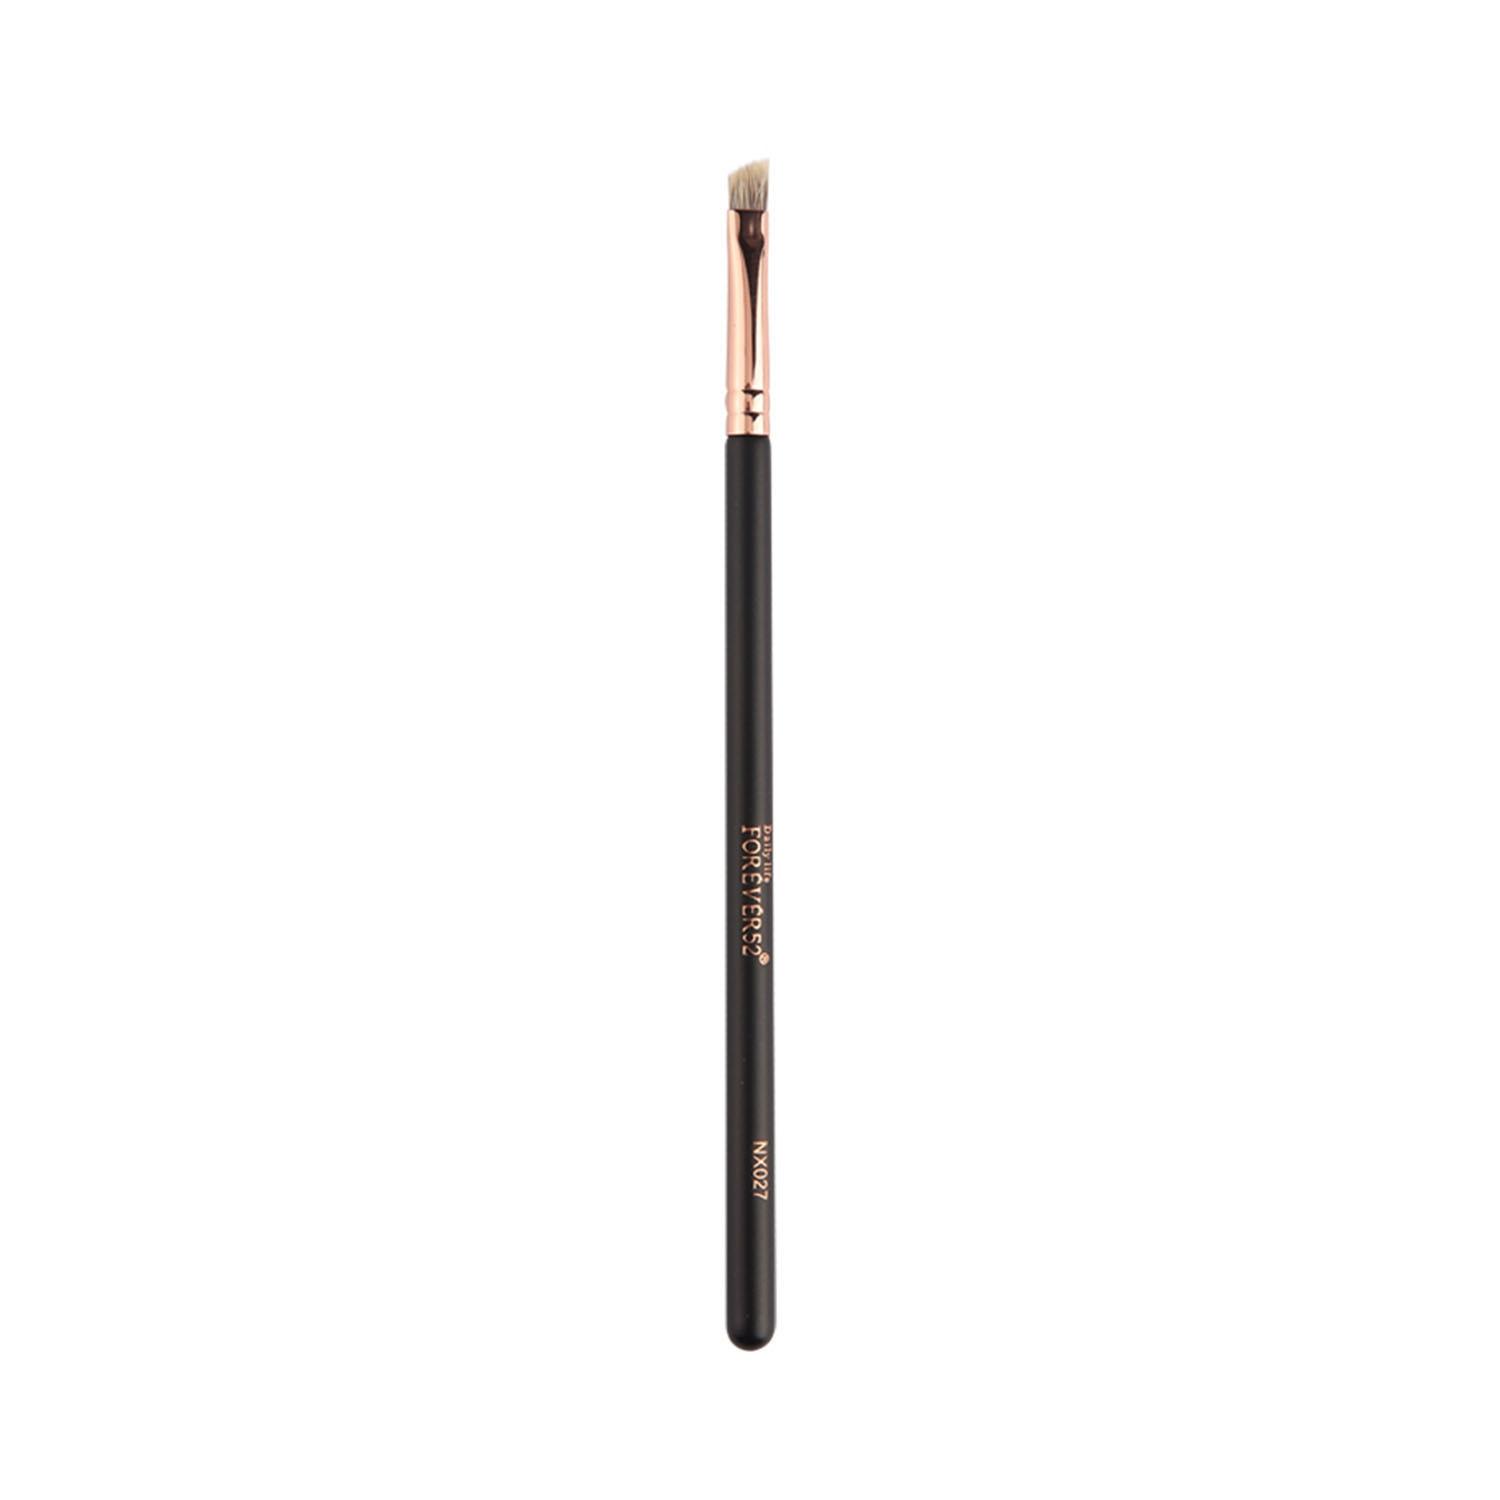 daily life forever52 eye brow brush - nx027 (1pc)